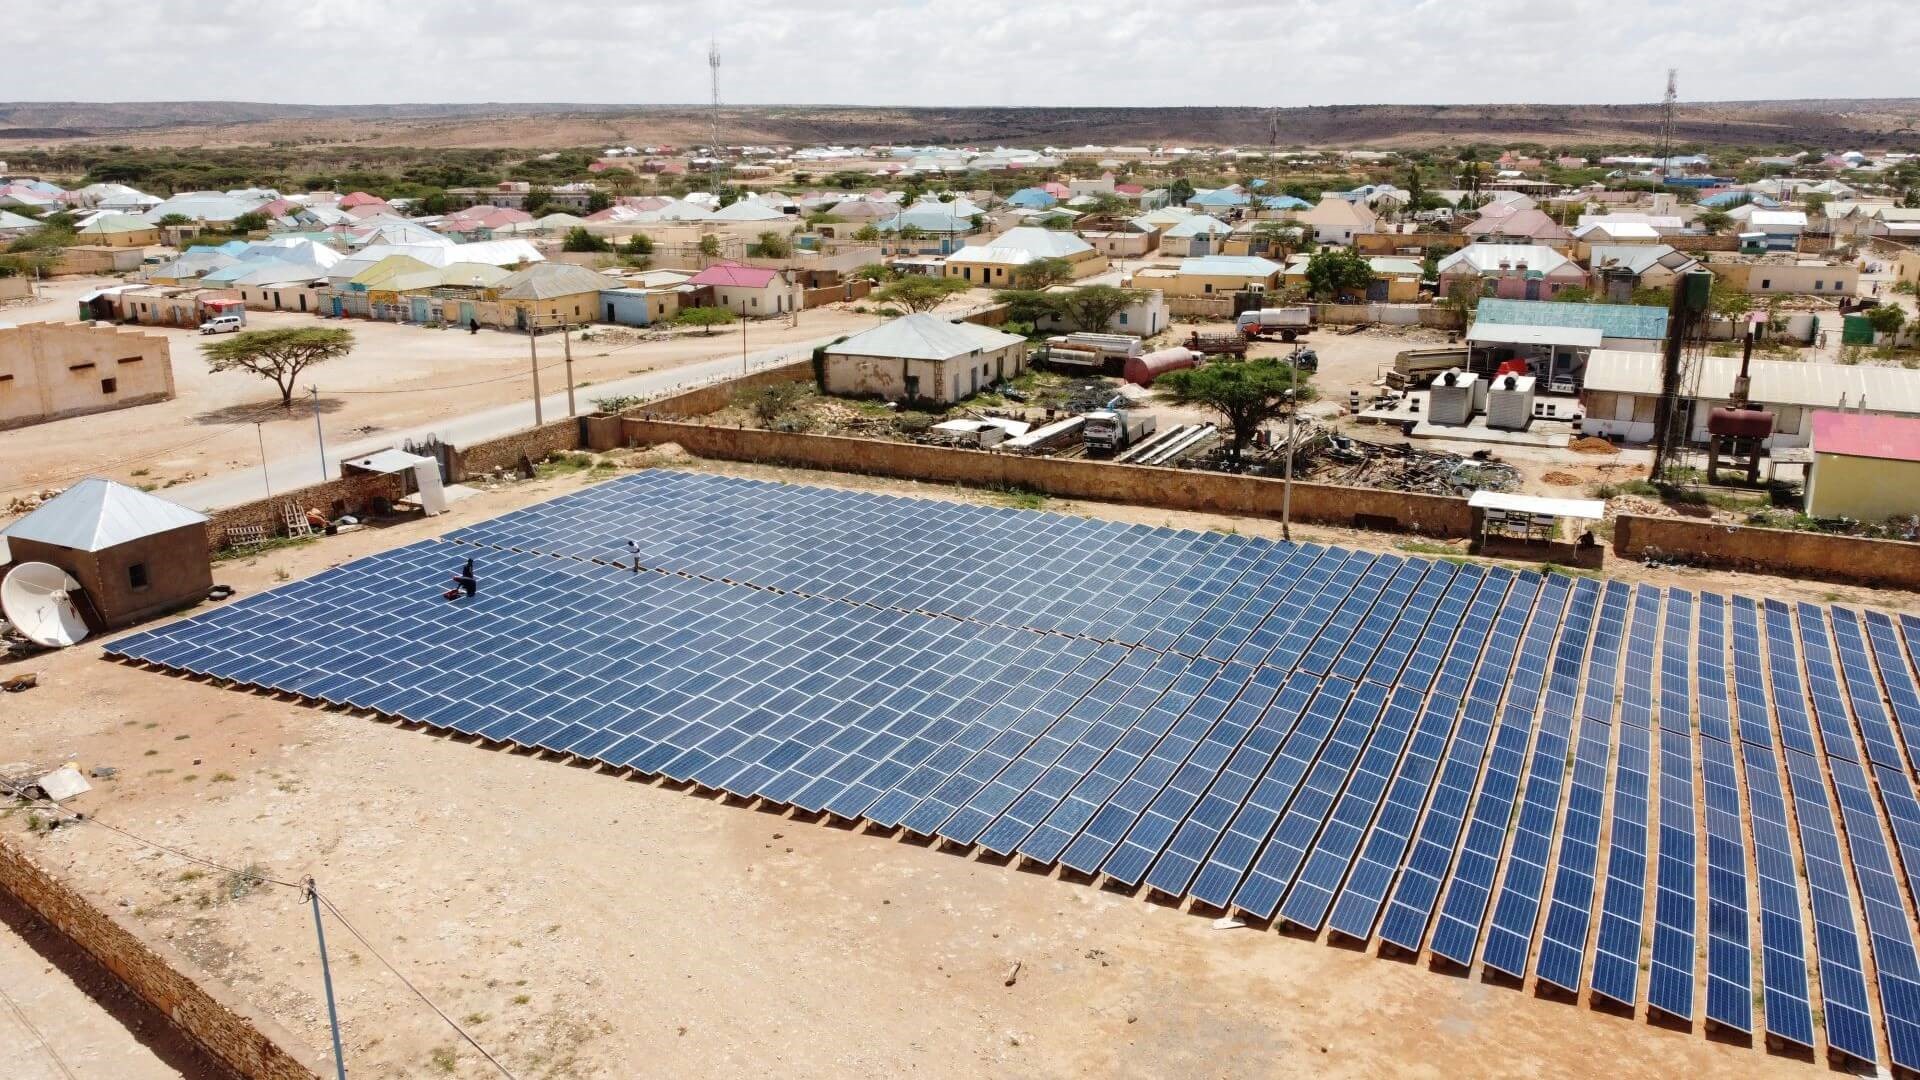 Rows of solar panels on solar farm in Africa, with residential buildings in background